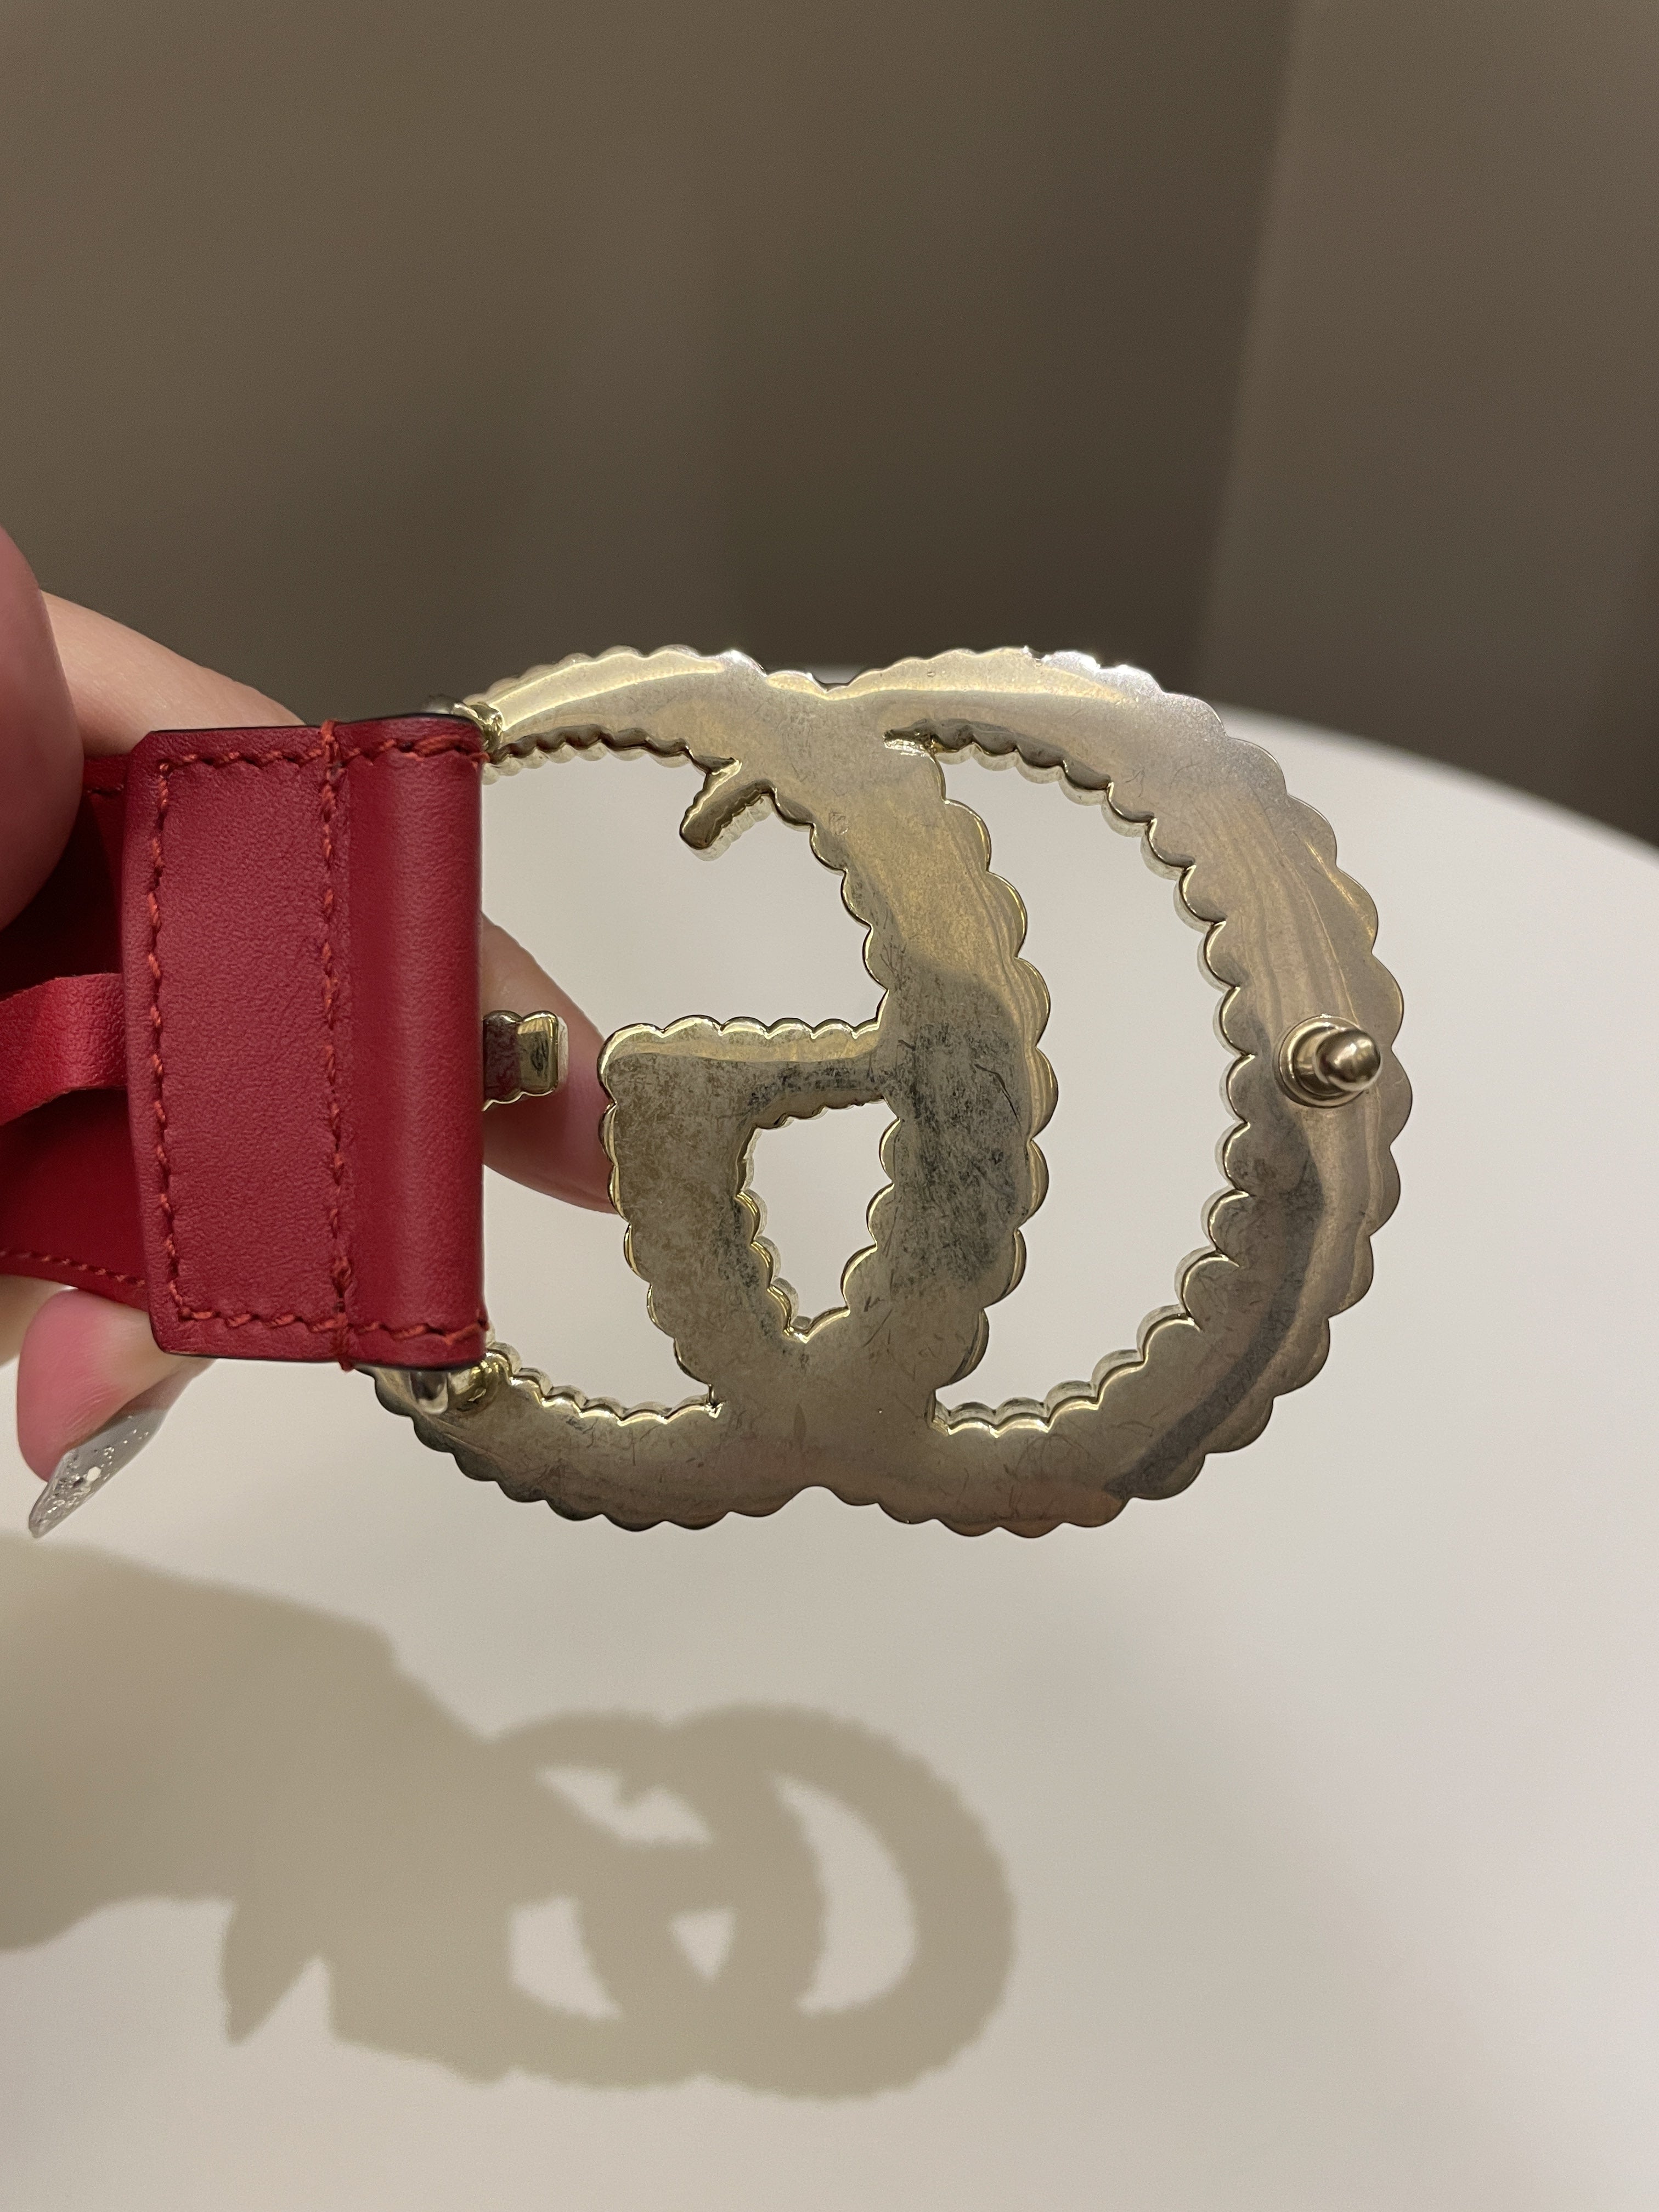 Gucci Torchon Double G Belt
Hibiscus Red